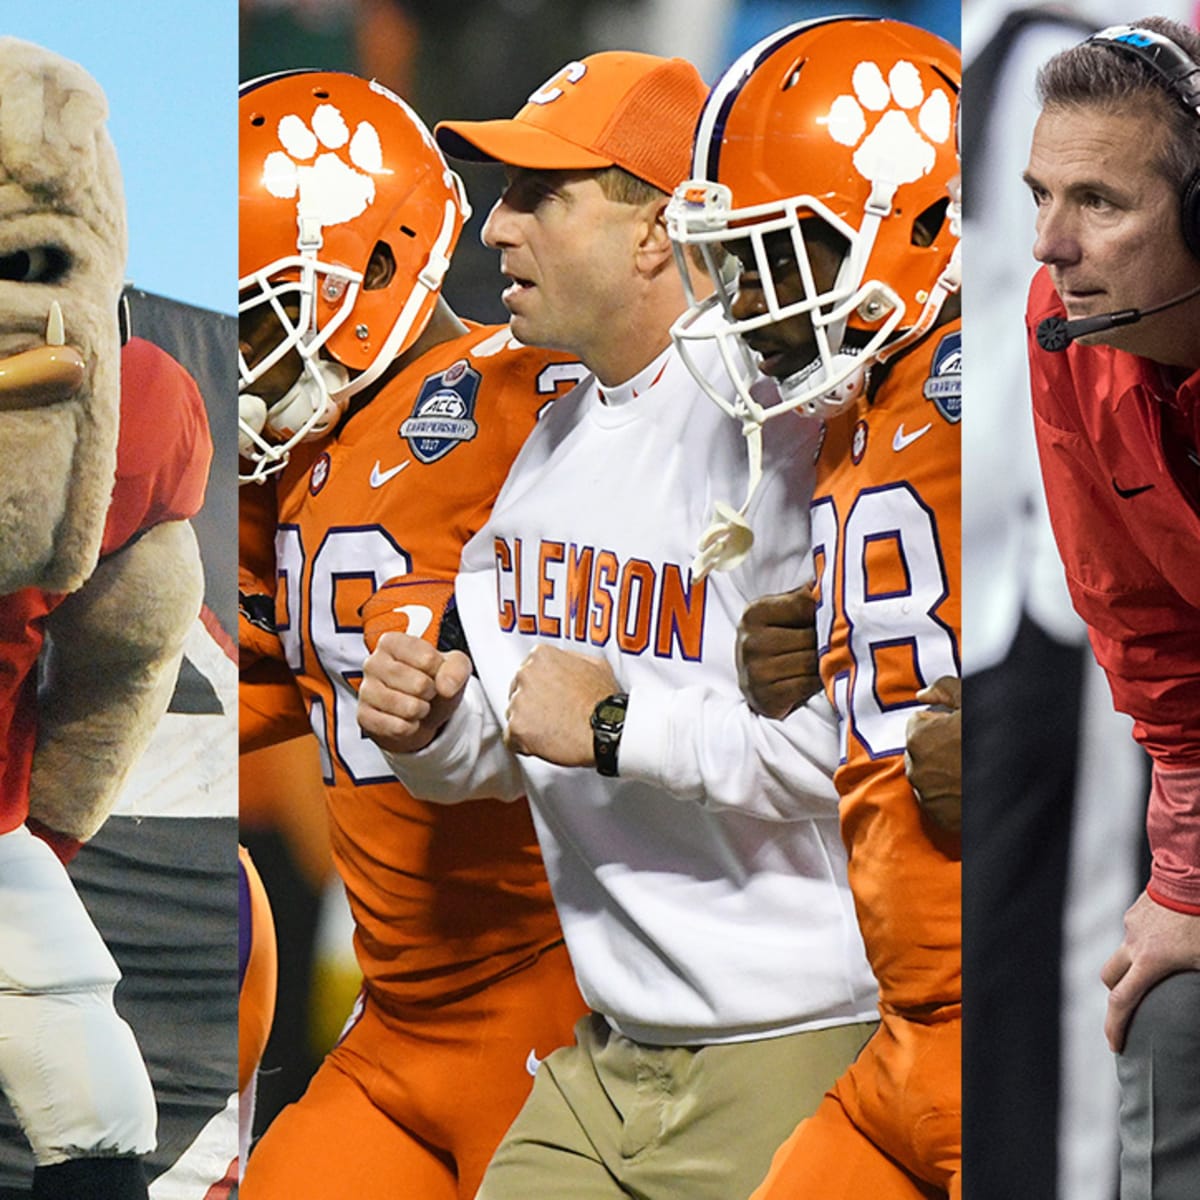 Signing day winners losers in college football led by Clemson, USC